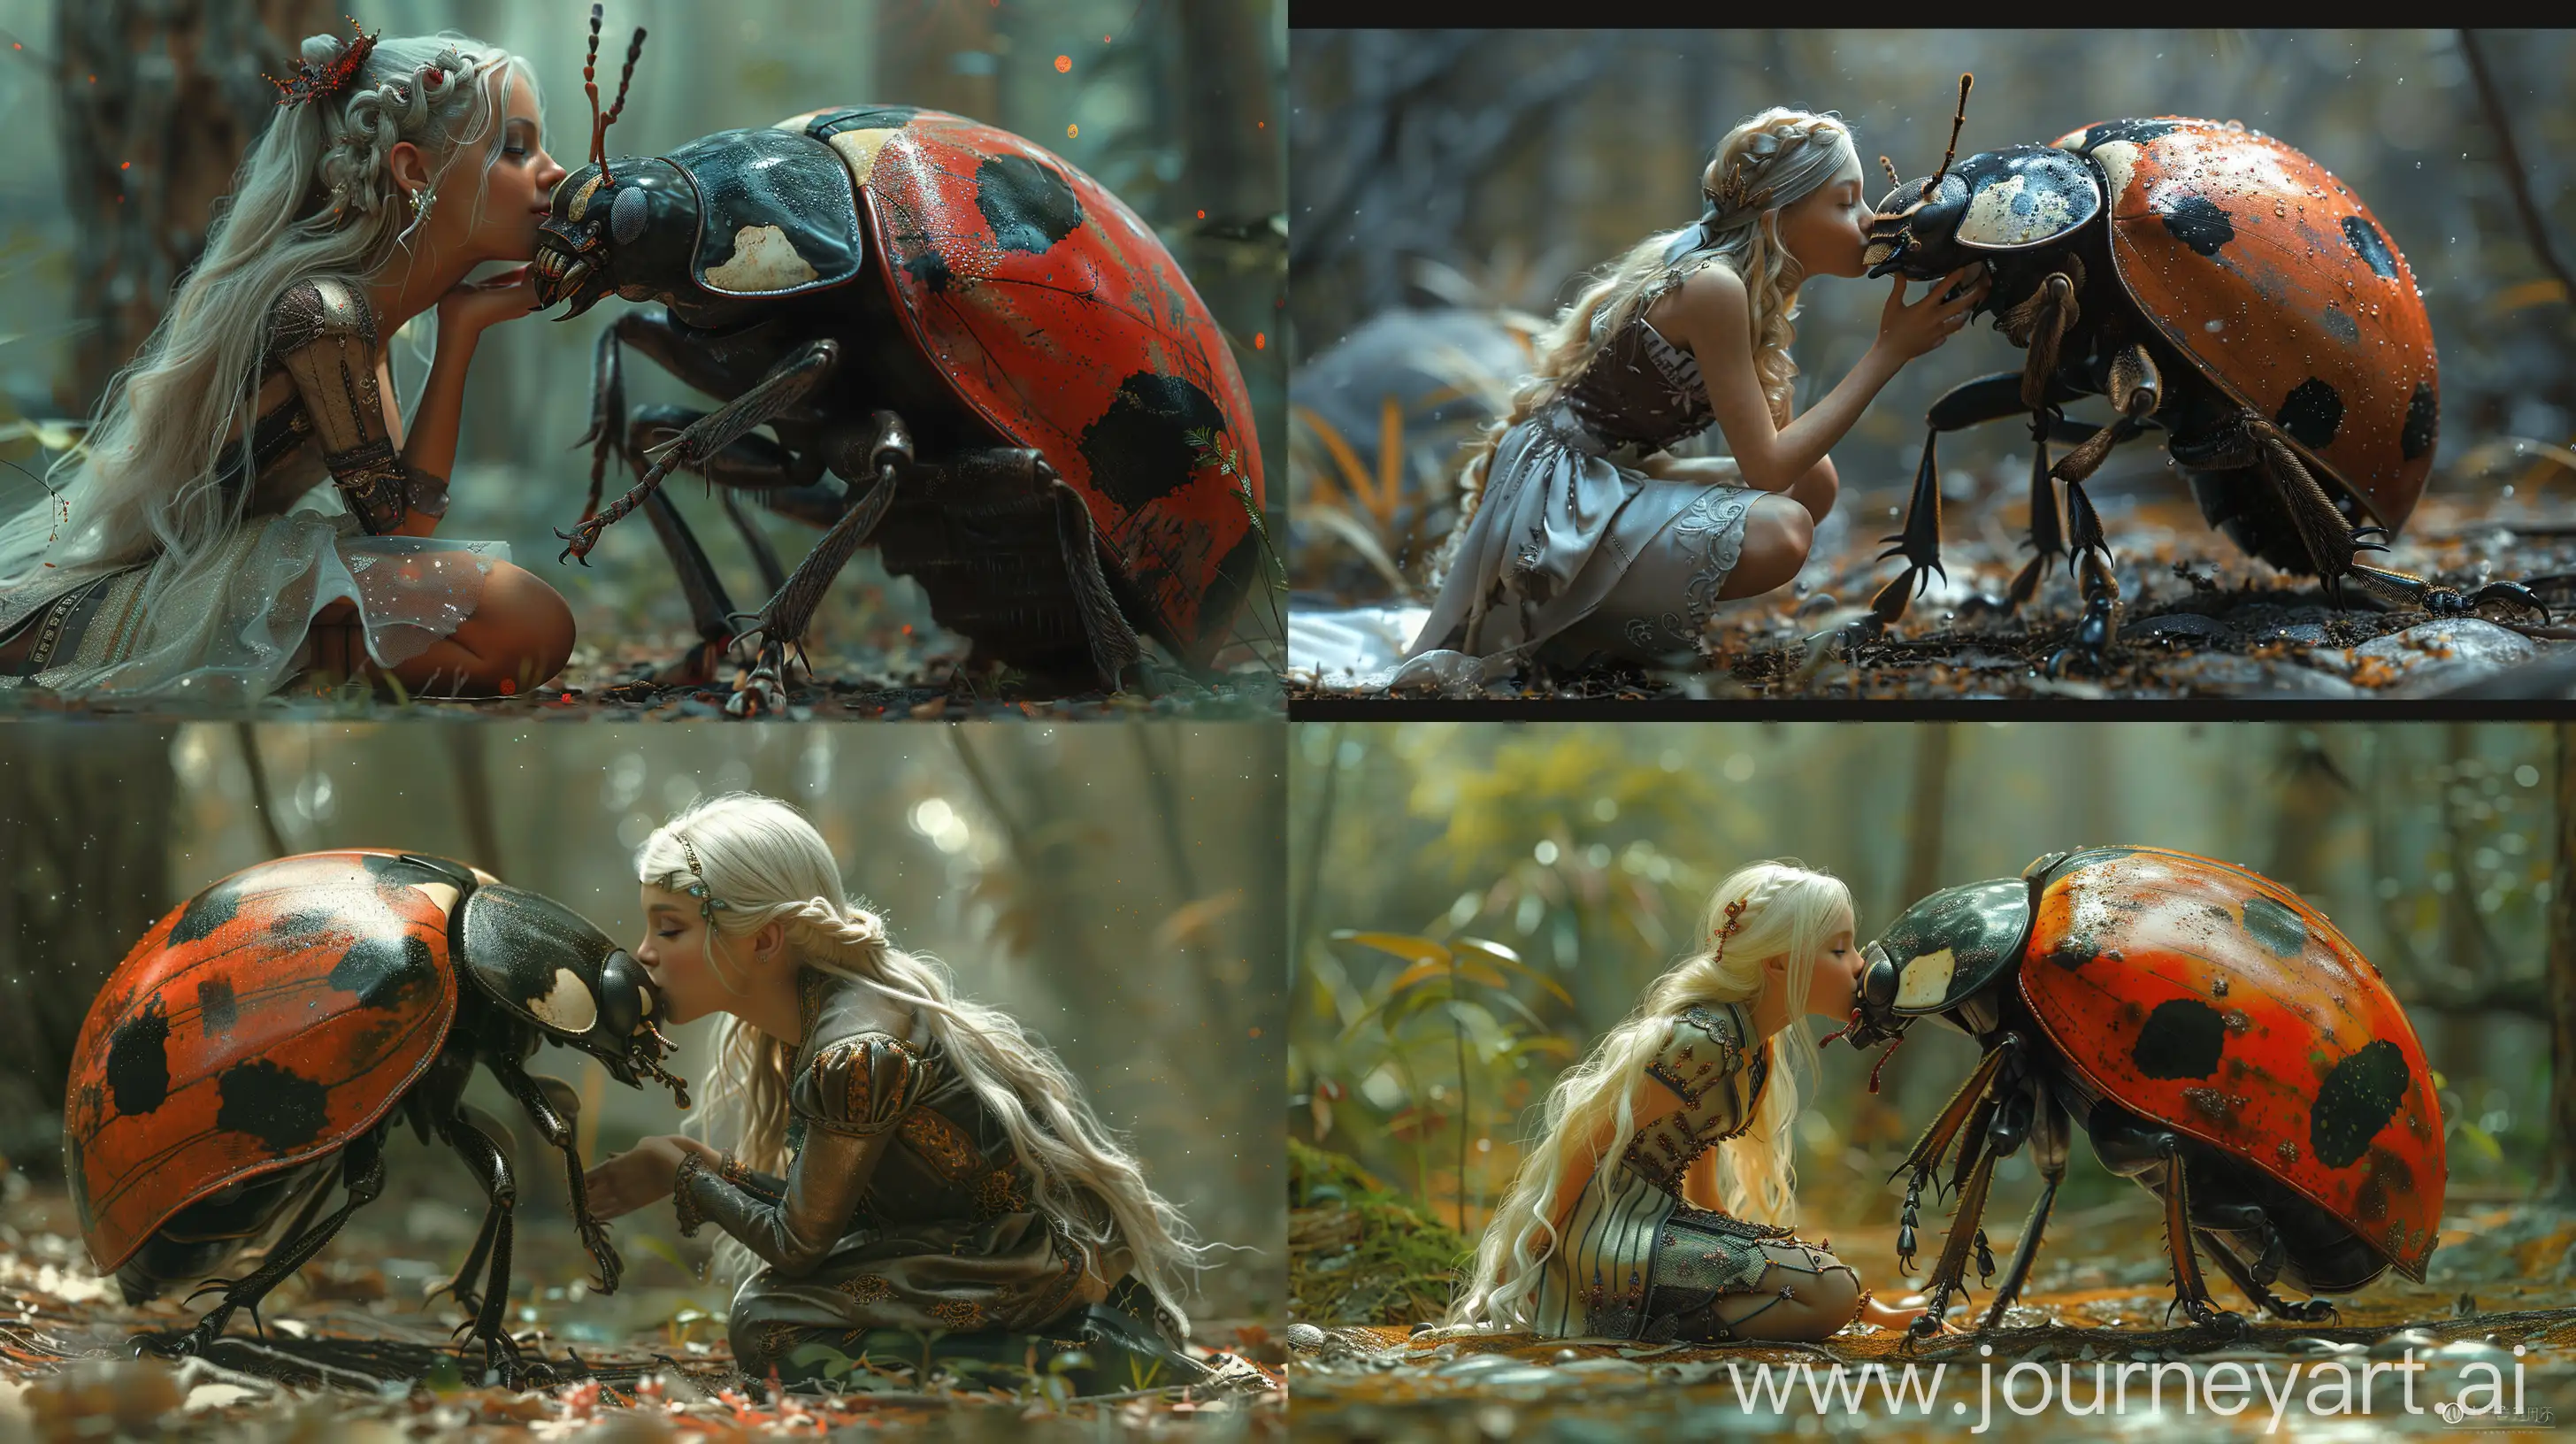 Enchanting-Princess-Kissing-Giant-Ladybug-in-Magical-Forest